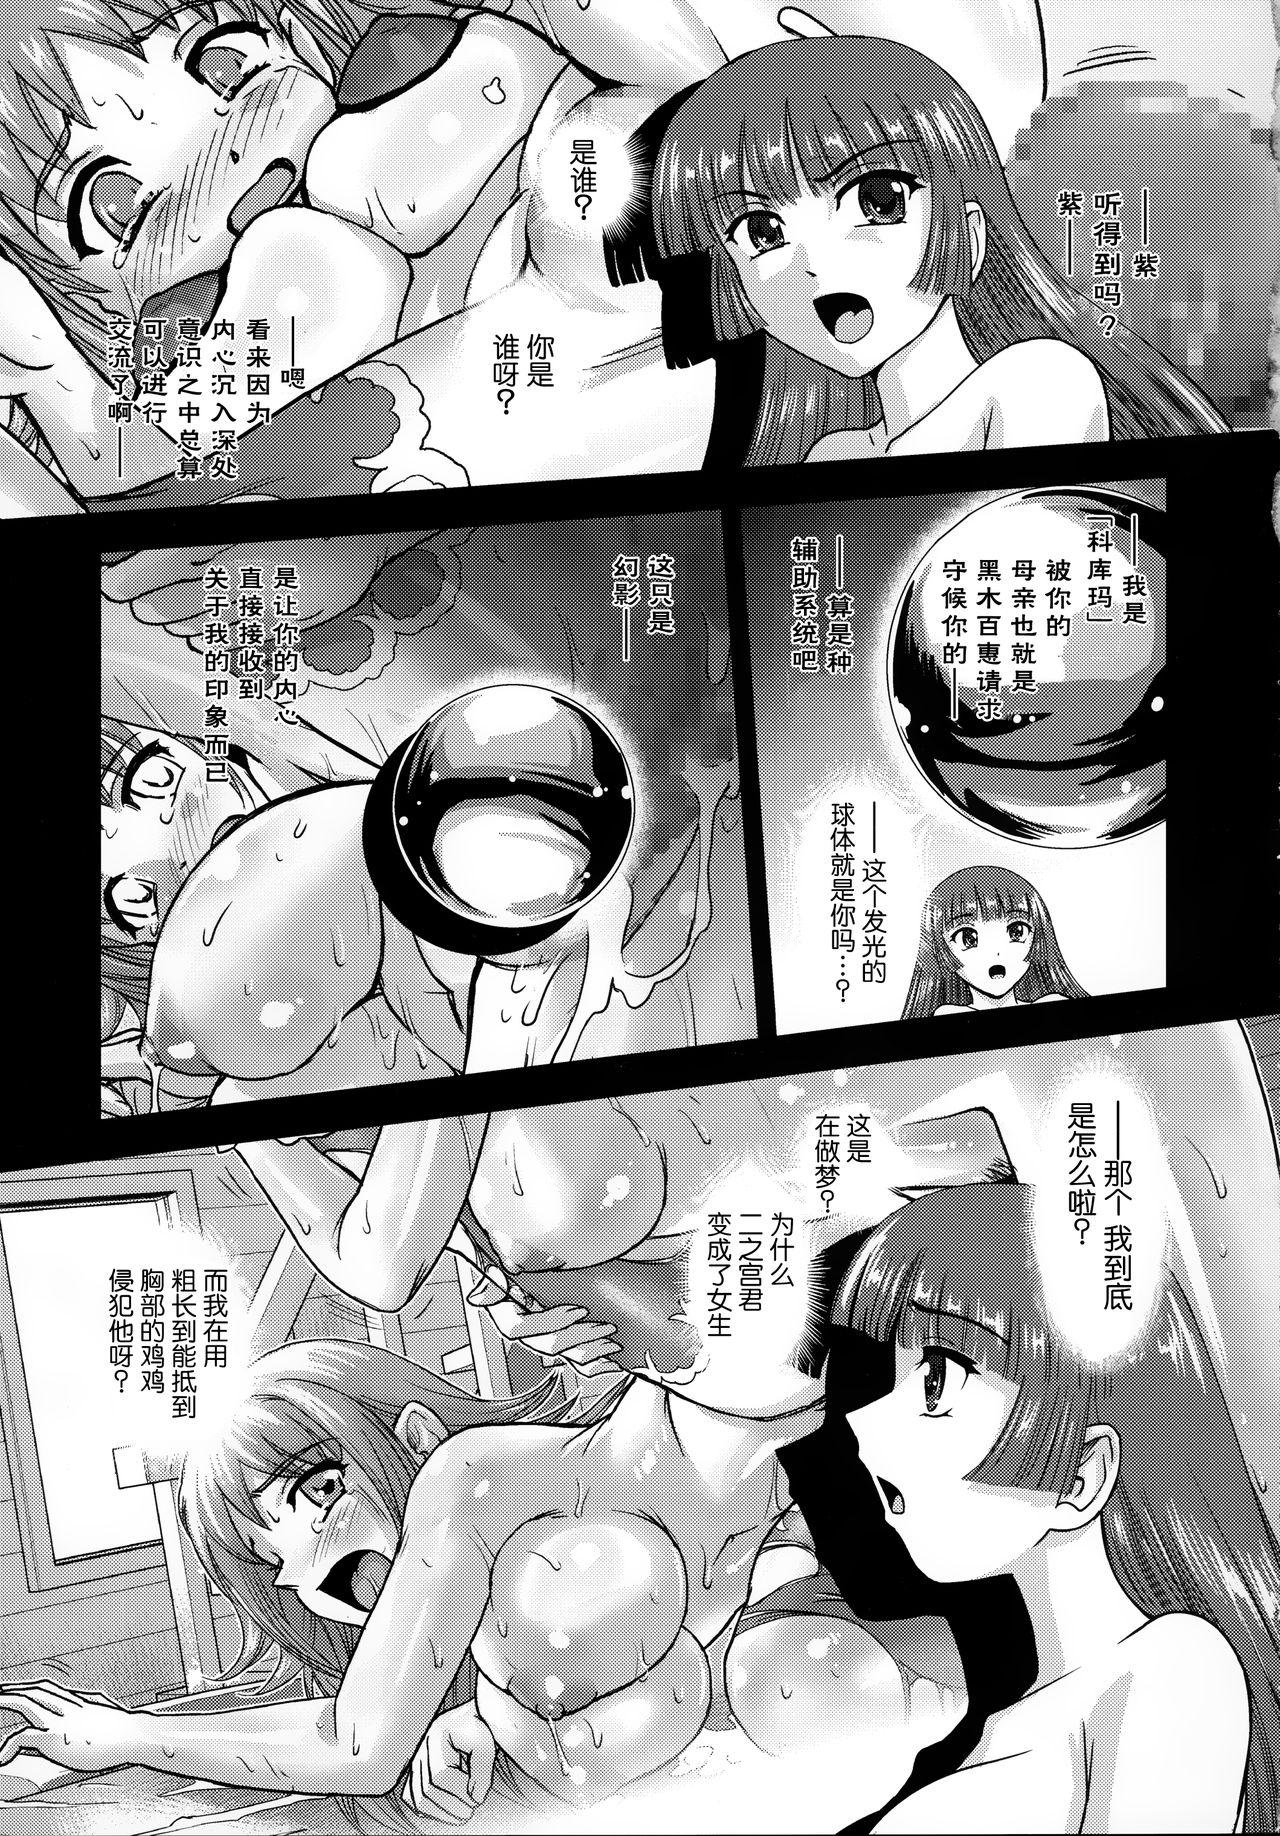 Family Sex (C95) [Behind Moon (Dulce-Q)] DR:II ep.7 ~Dulce Report~ | 达西报告II Ep.7 [Chinese] [鬼畜王汉化组] - Original Innocent - Page 5